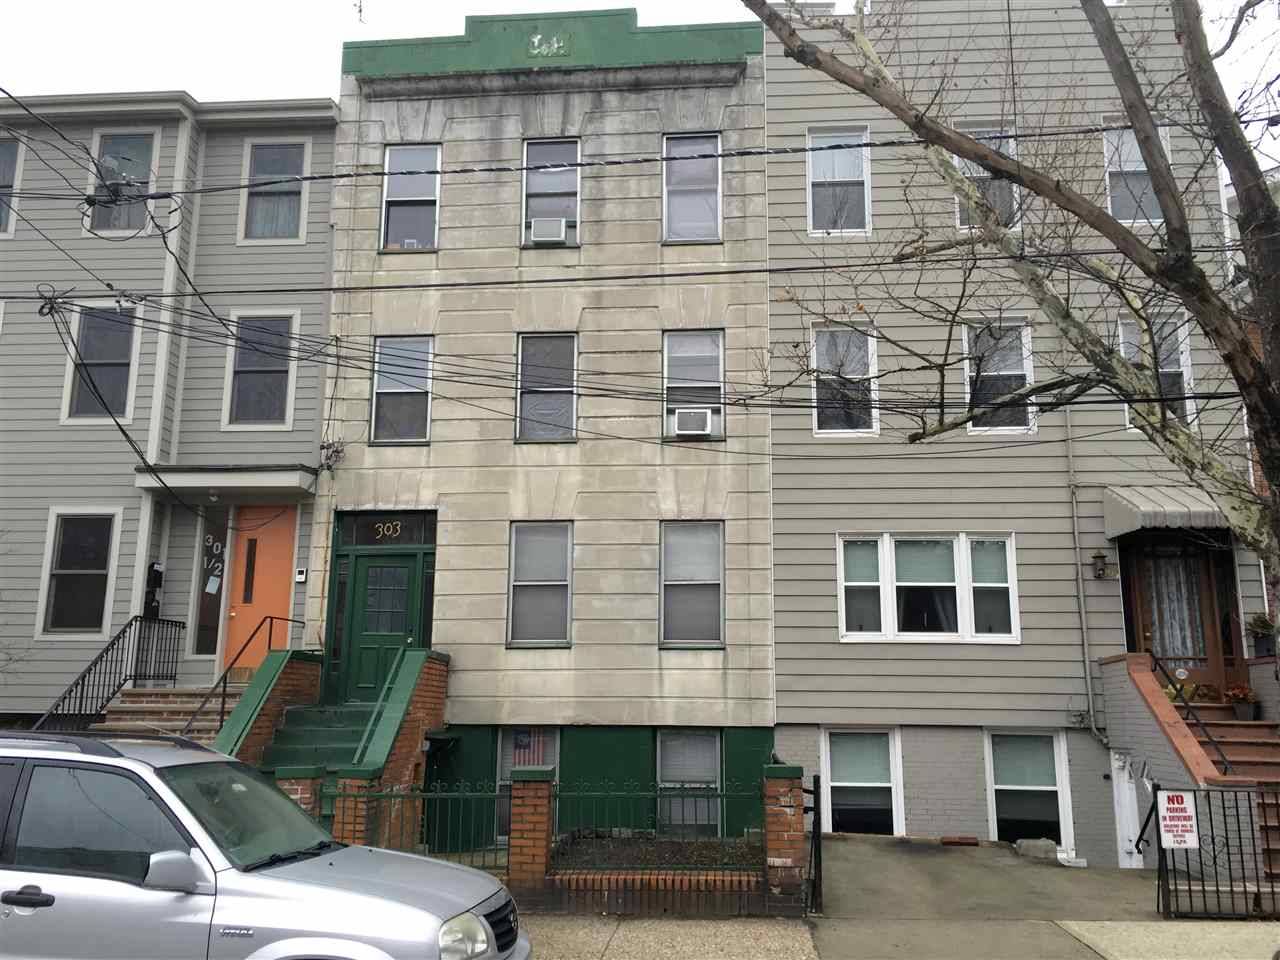 303 4TH ST Multi-Family New Jersey